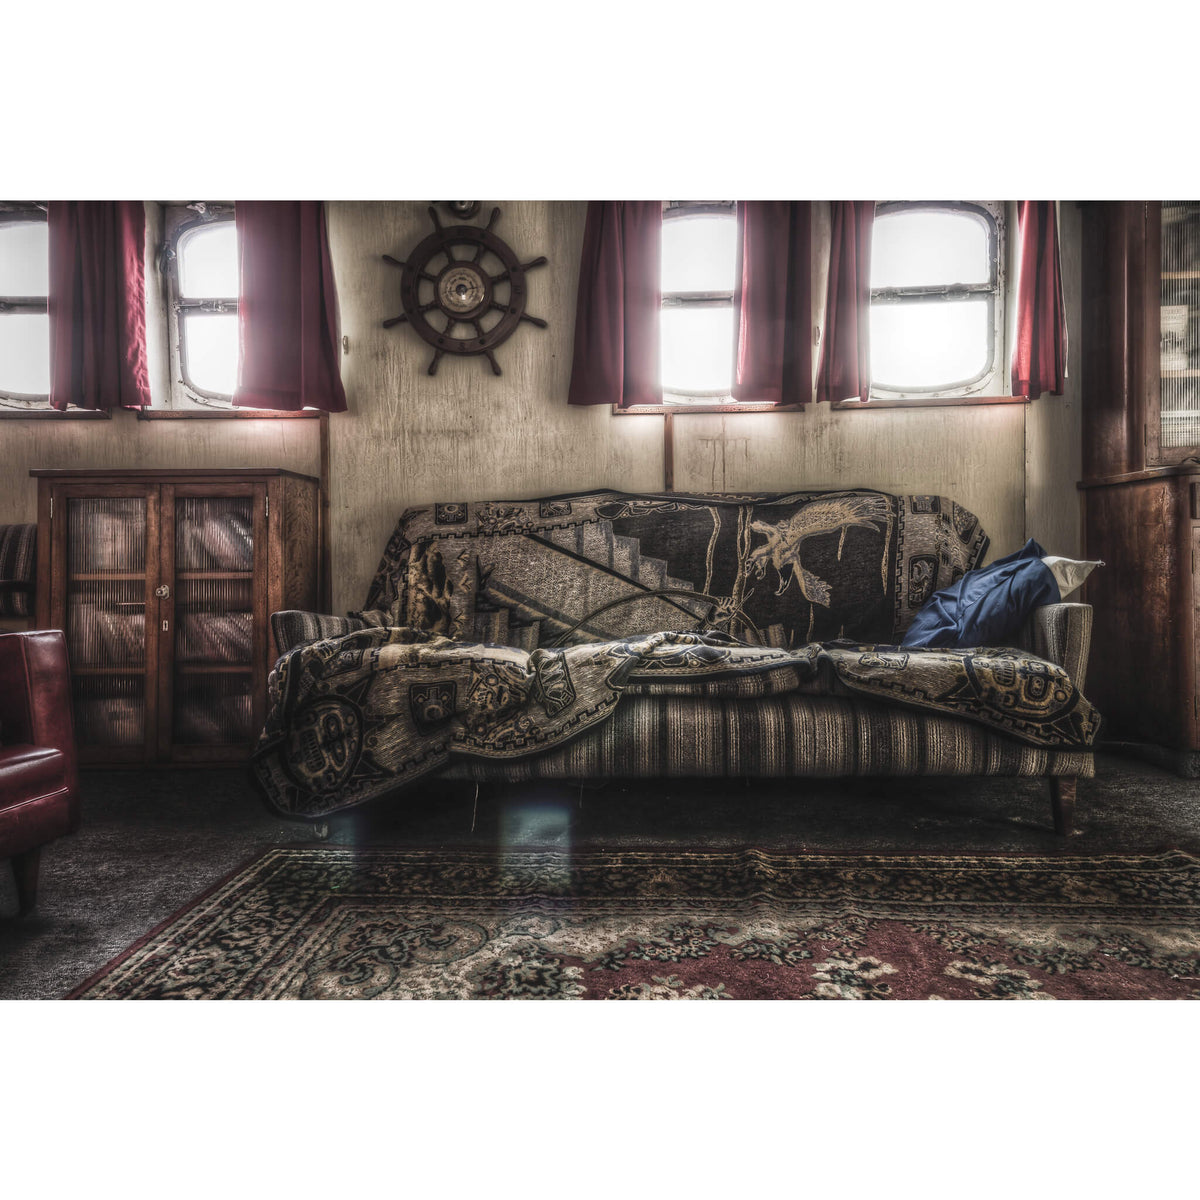 Officers Smoke Room | MV Cape Don Fine Art Print - Lost Collective Shop